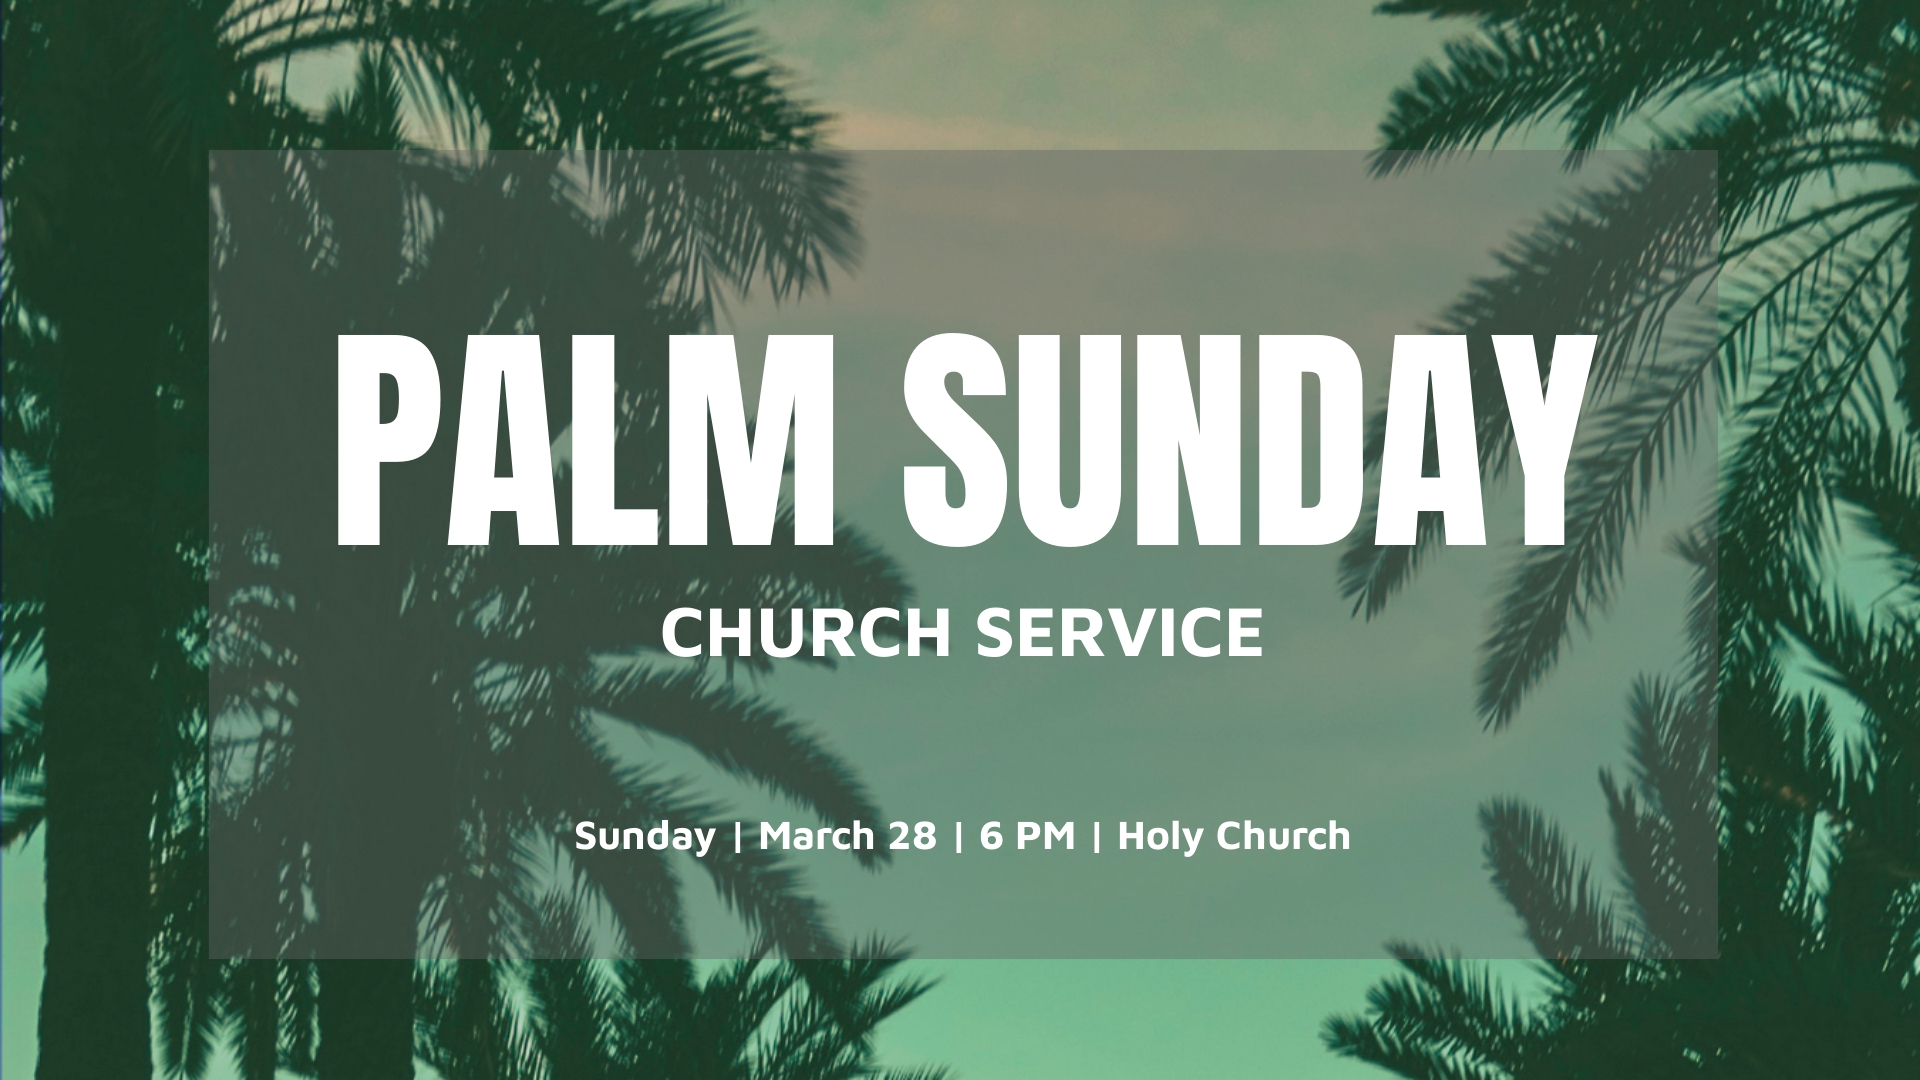 Free Palm Sunday Facebook Event Cover Template.jpe